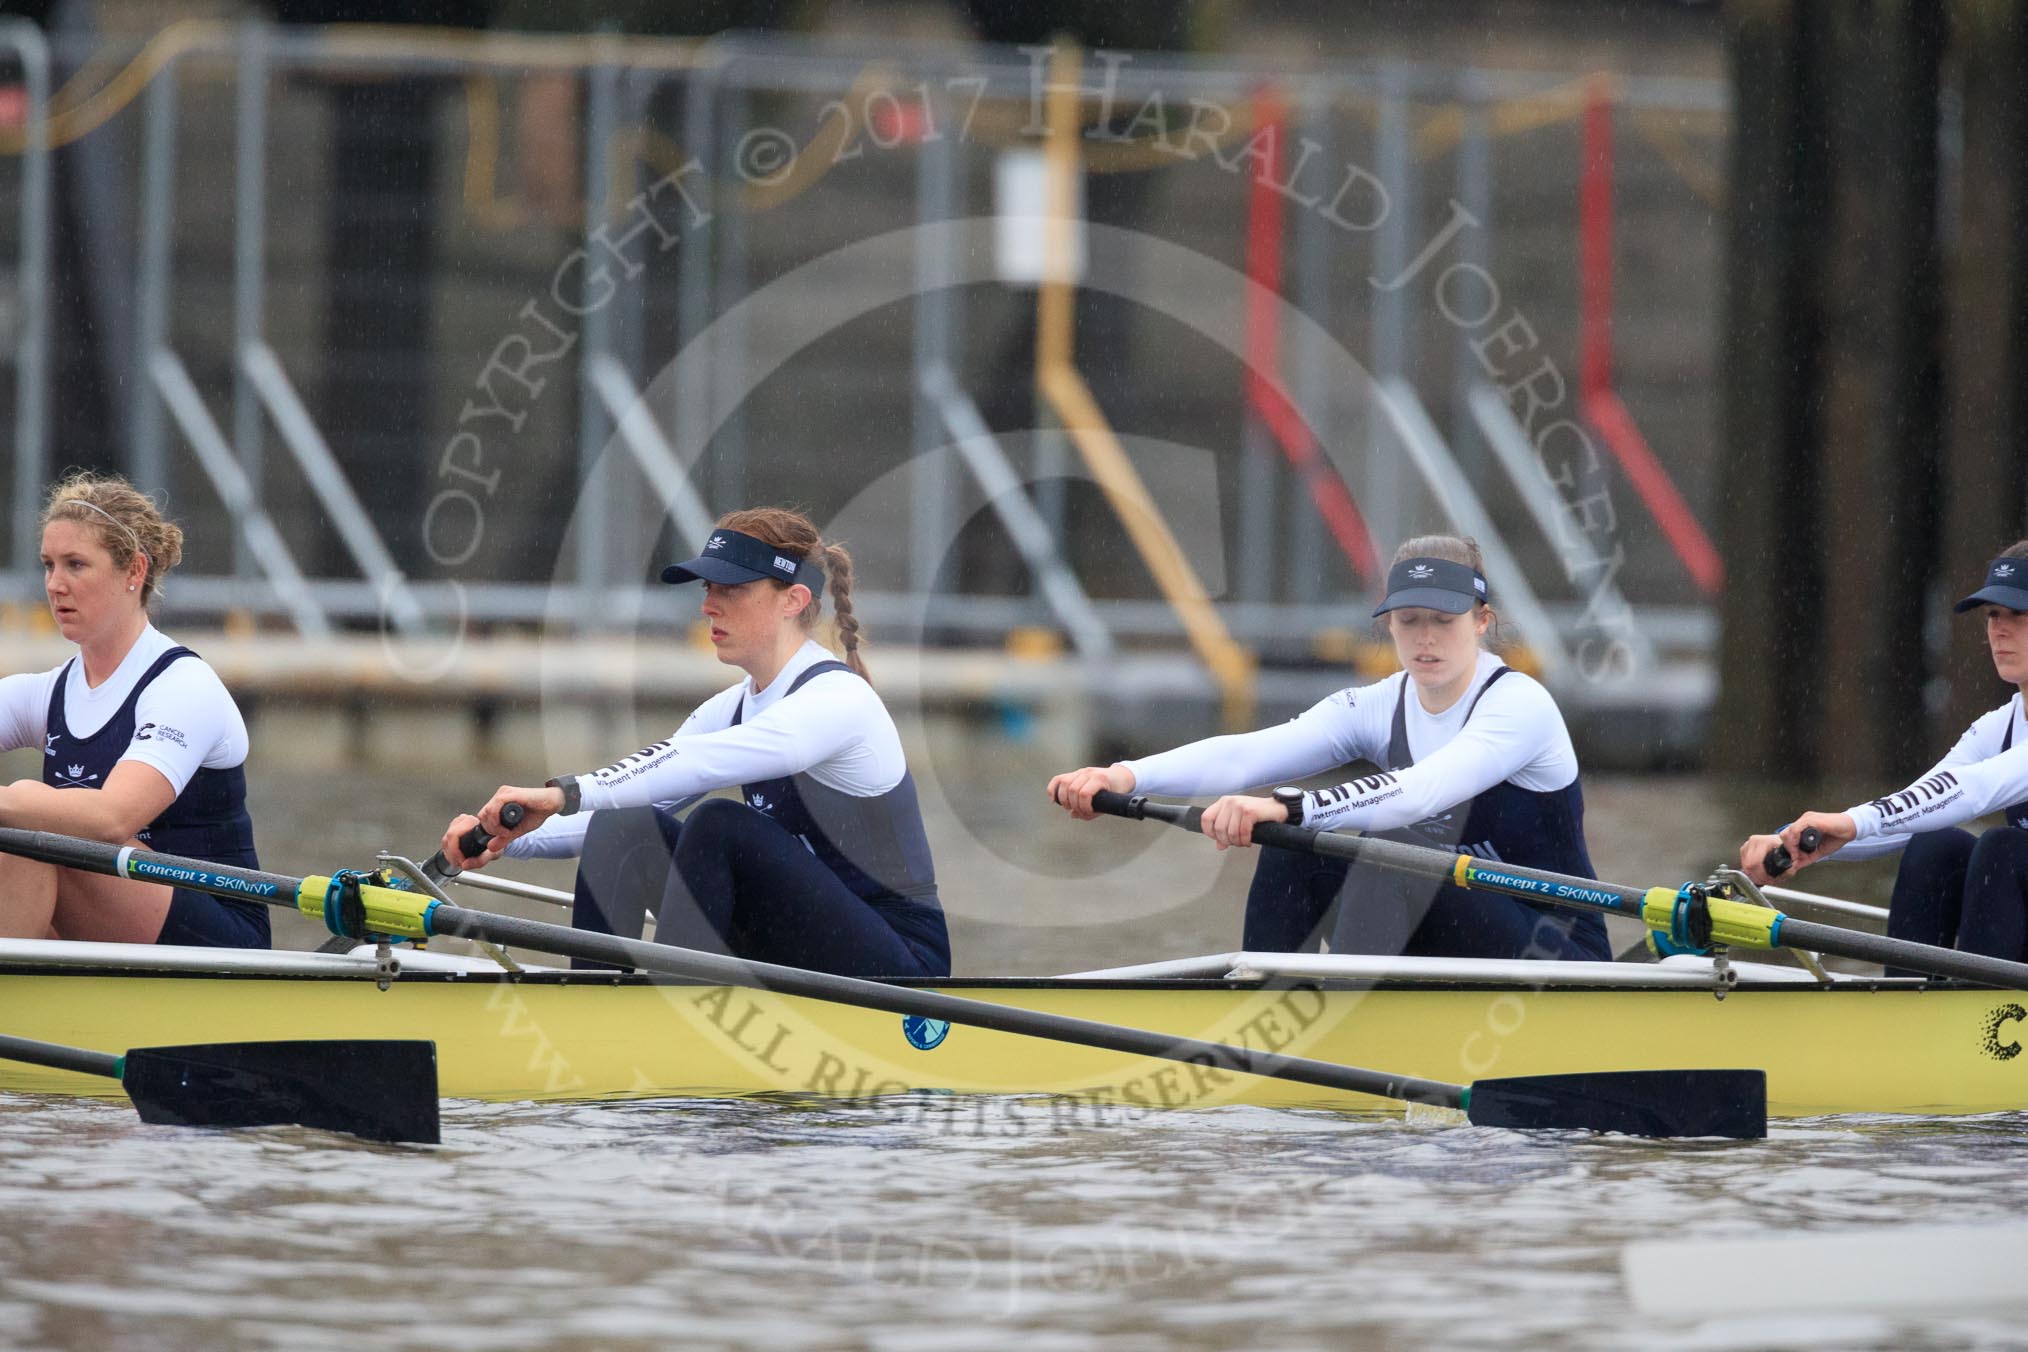 The Boat Race season 2018 - Women's Boat Race Trial Eights (OUWBC, Oxford): "Coursing River" - 5 Morgan McGovern, 4 Anna Murgatroyd, 3 Stefanie Zekoll, 2 Rachel Anderson.
River Thames between Putney Bridge and Mortlake,
London SW15,

United Kingdom,
on 21 January 2018 at 14:27, image #49